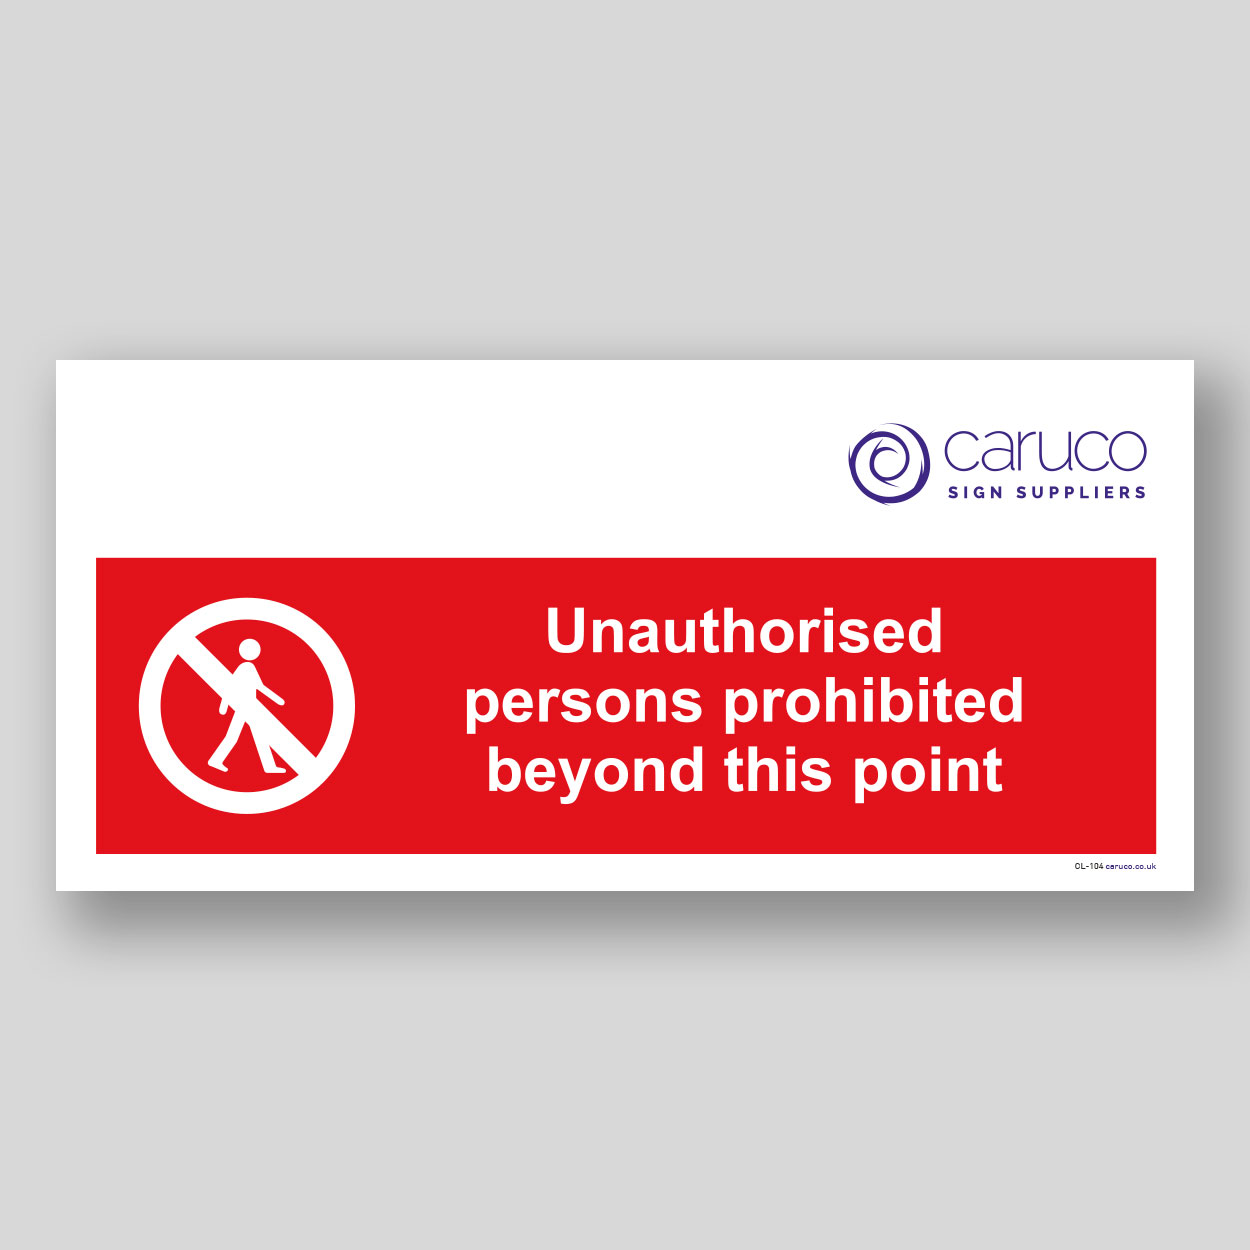 CL-104 Unauthorised persons prohibited